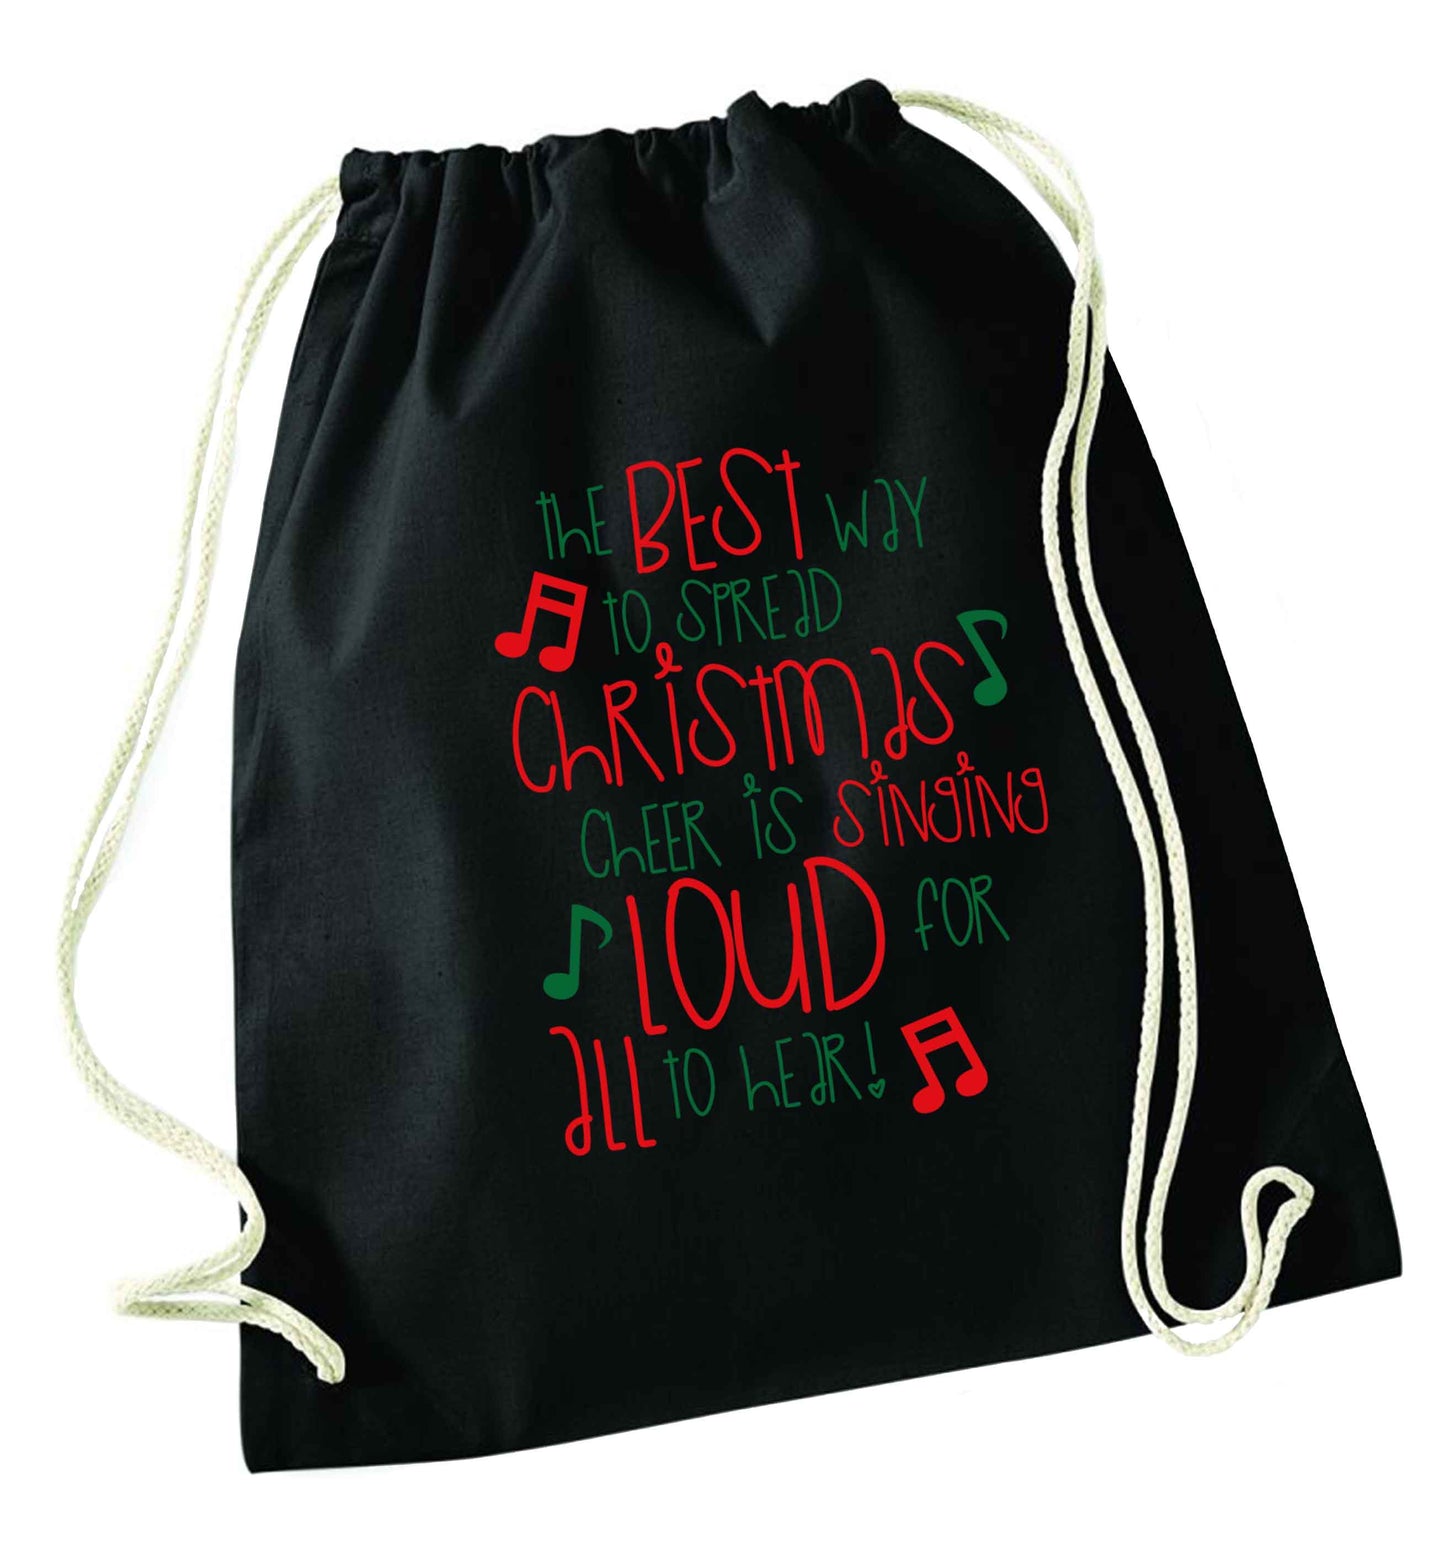 The best way to spread Christmas cheer is singing loud for all to hear black drawstring bag